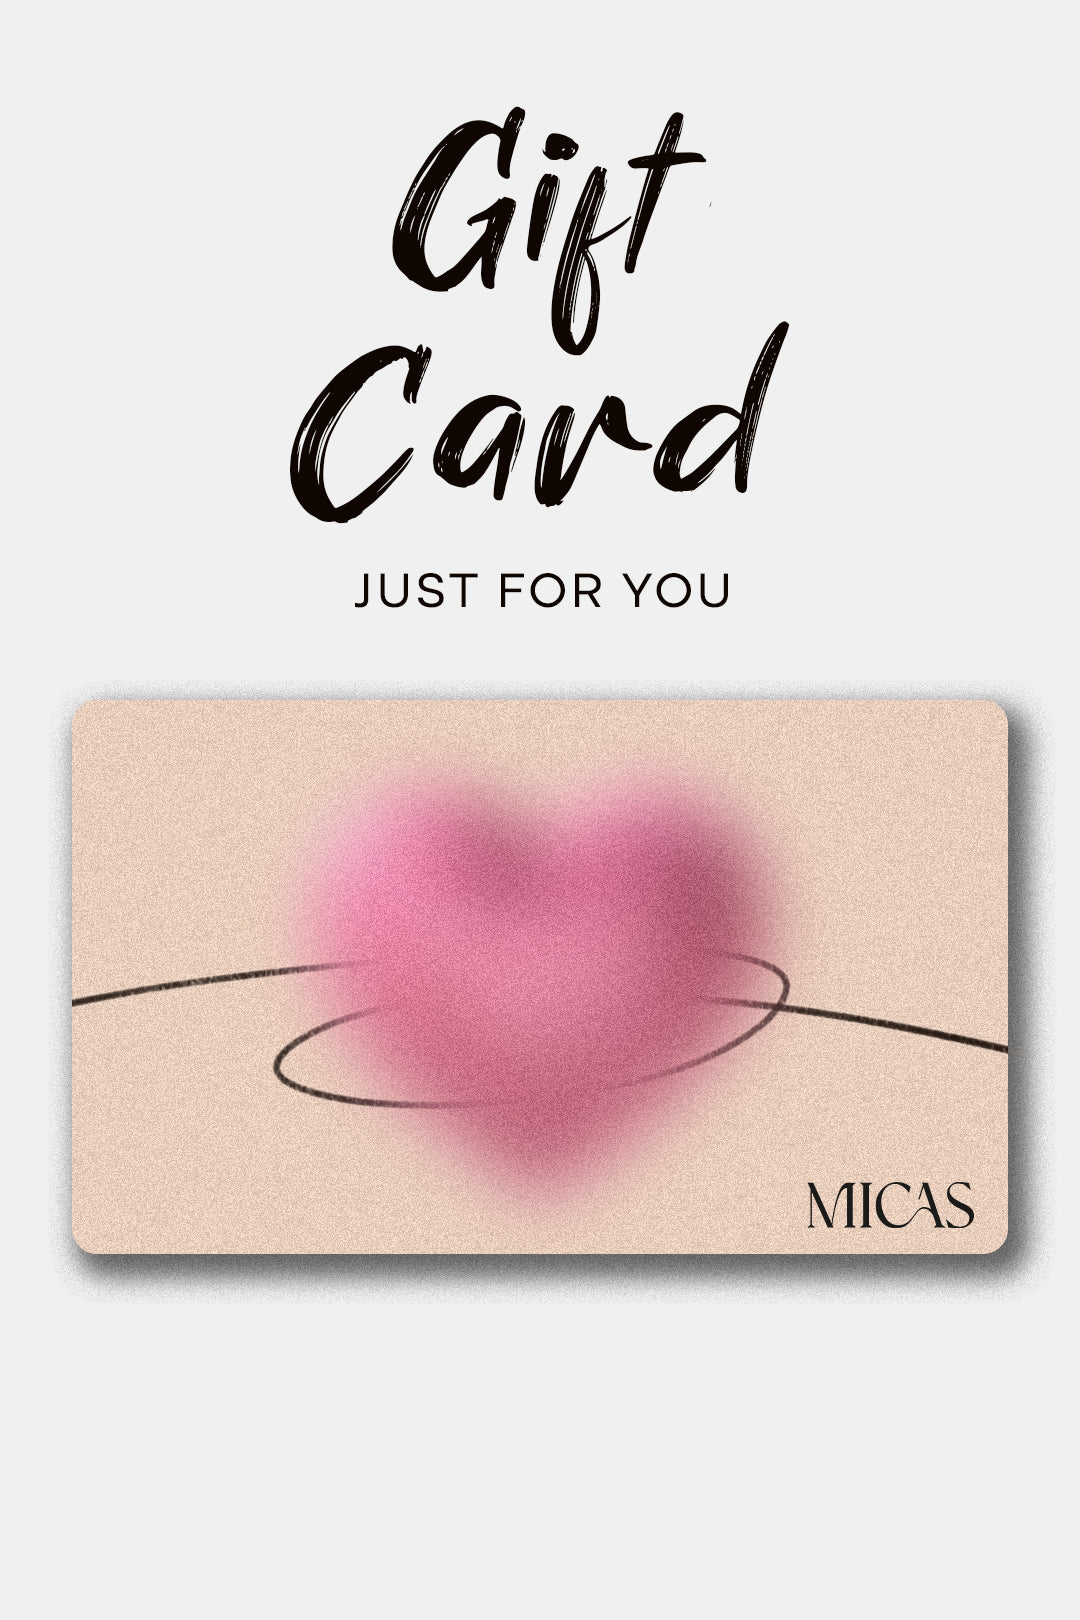 Micas Gift Cards